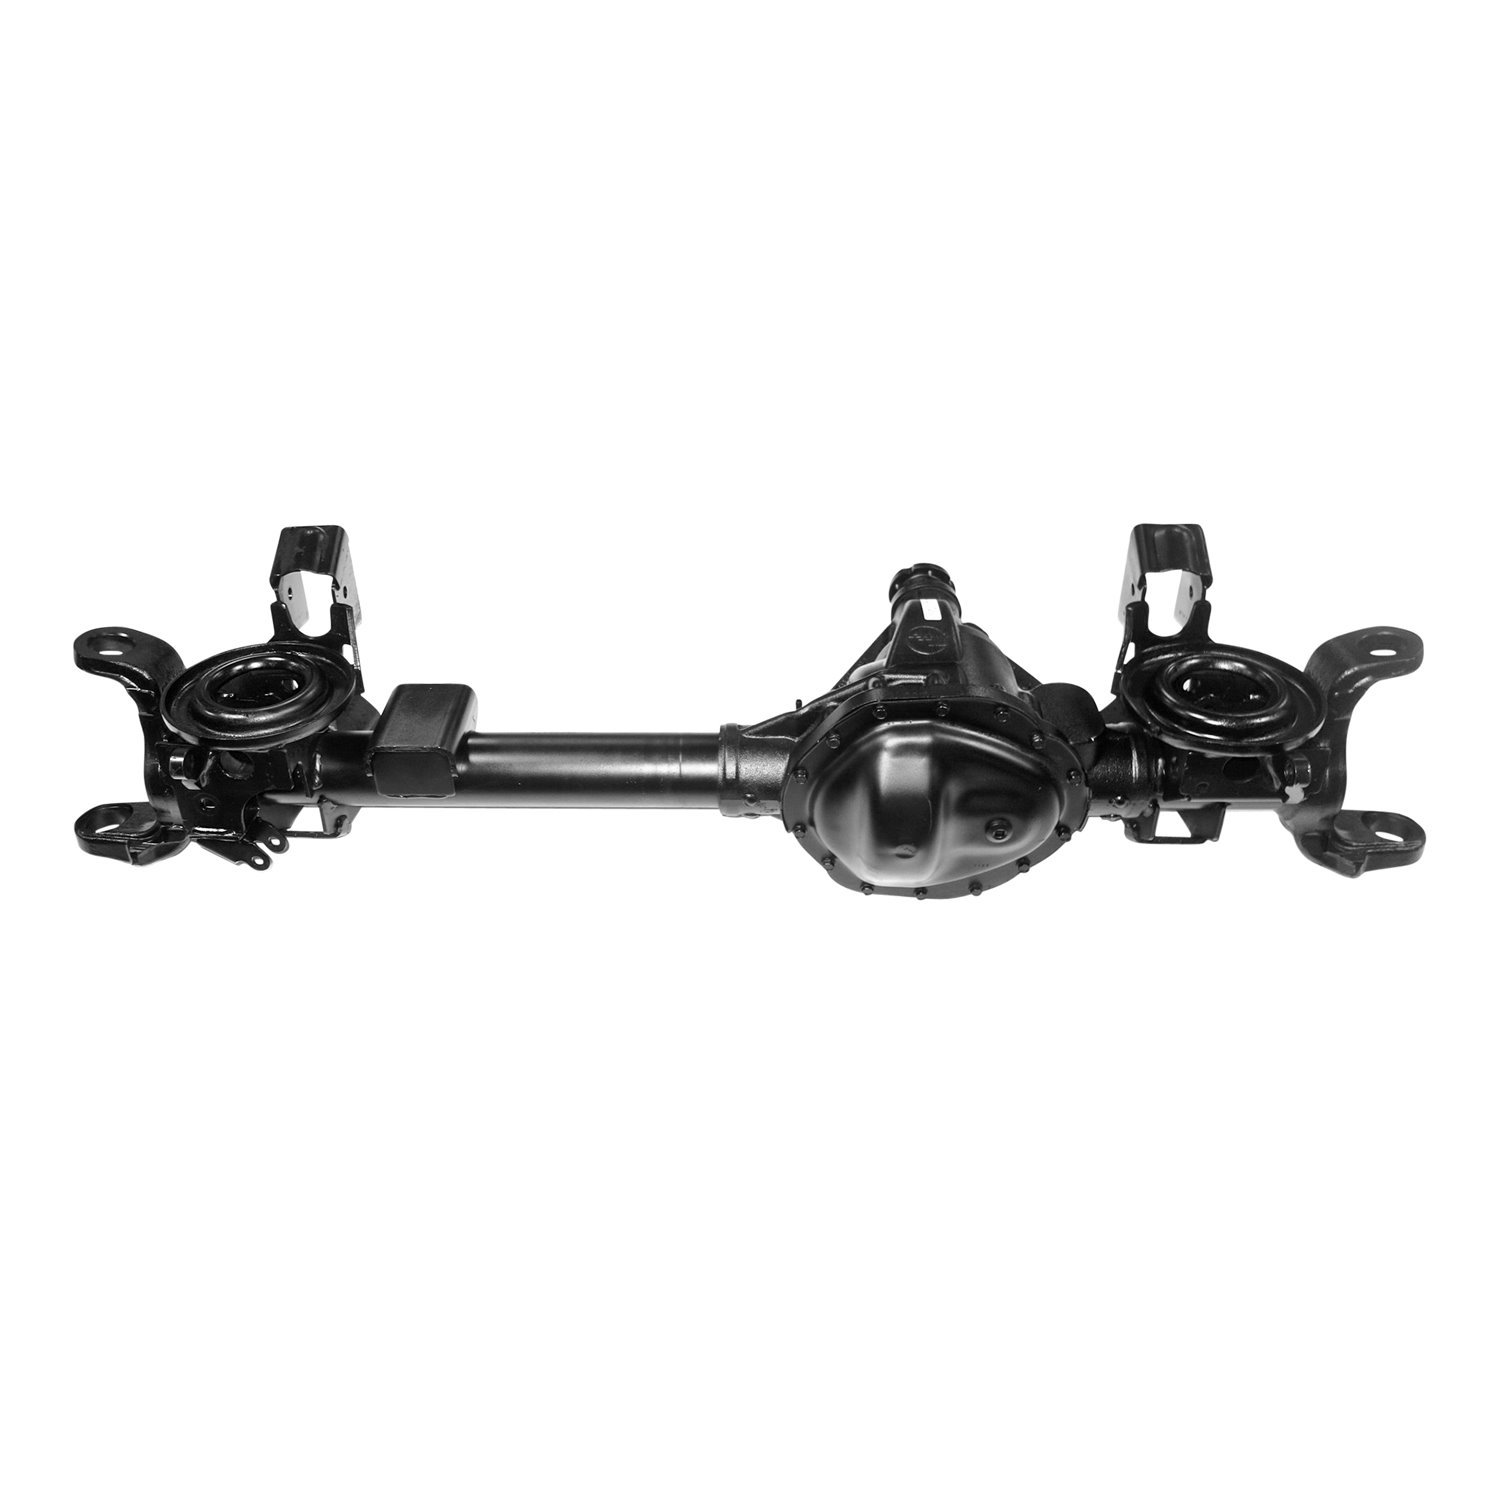 Remanufactured 9.25" Front diff Axle Assembly for RAM 2500 & 3500, 4:11 Ratio, Flat Smooth Yoke